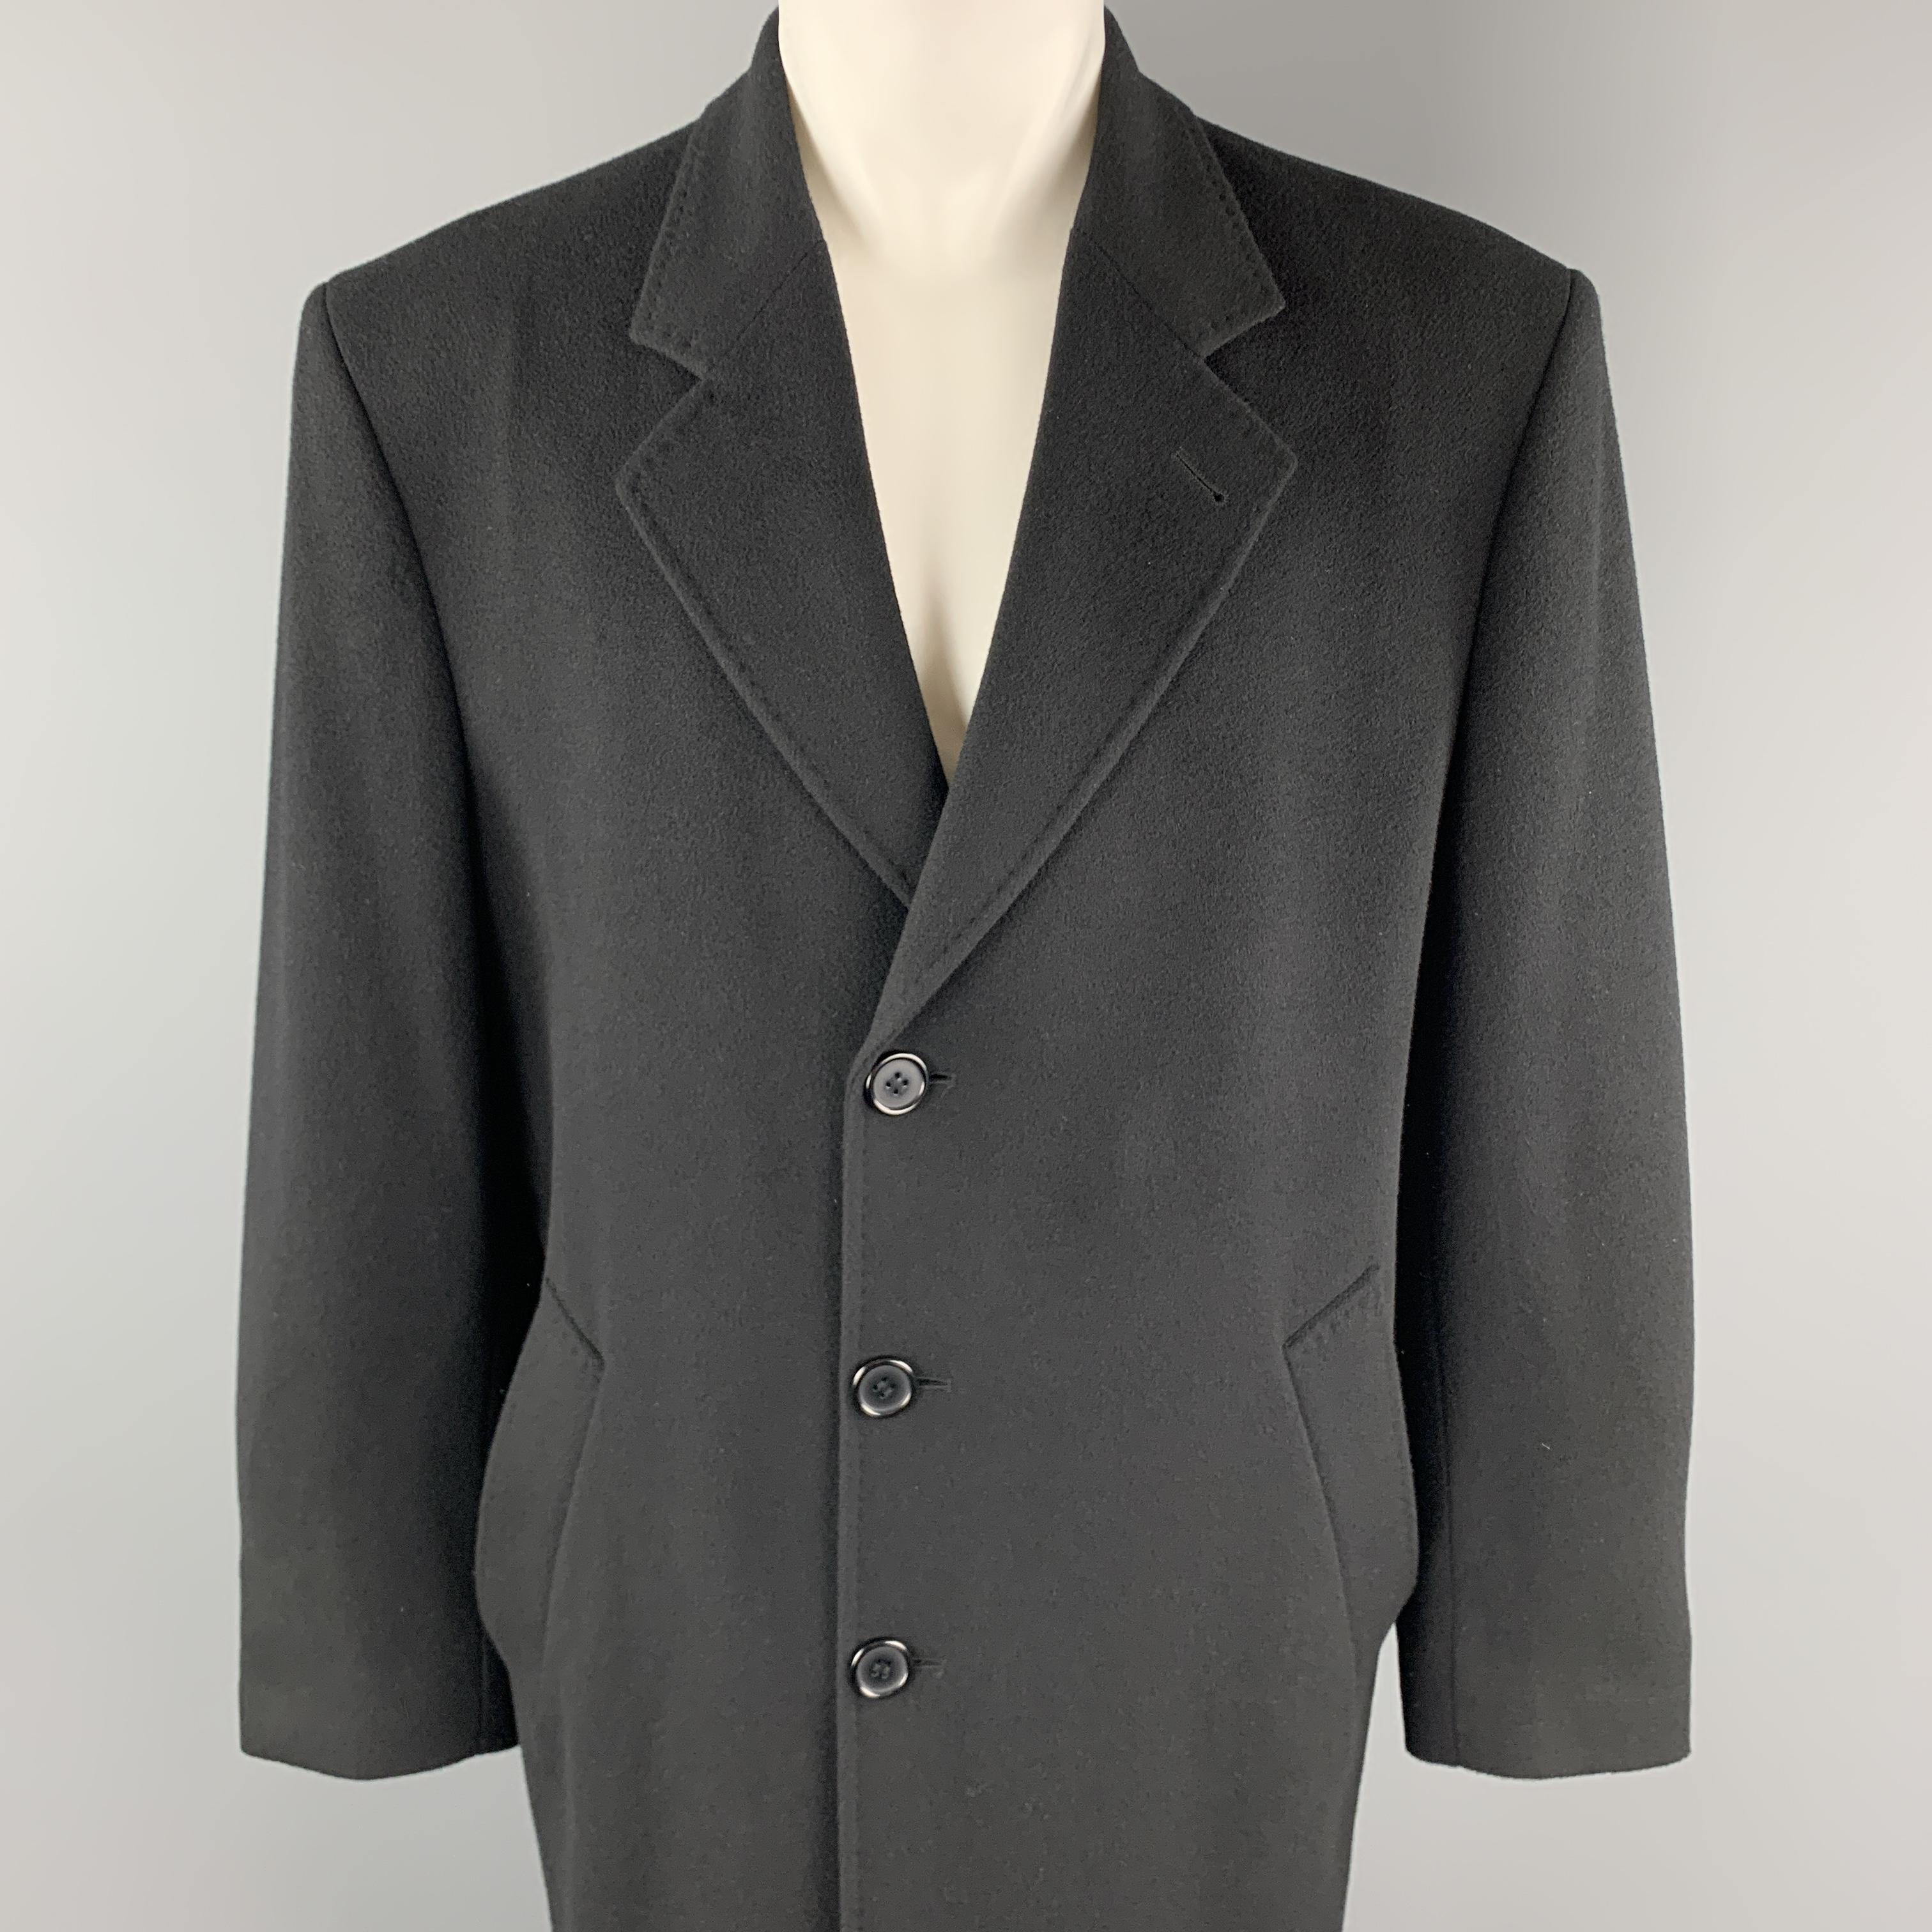 METROPOLITANVIEW over coat comes in black cashmere with a button front, slanted pockets, and top stitch notch lapel. Minor wear on liner. Broken button on sleeve cuff. As-is. Made in Italy.

Very Good Pre-Owned Condition.
Marked: IT